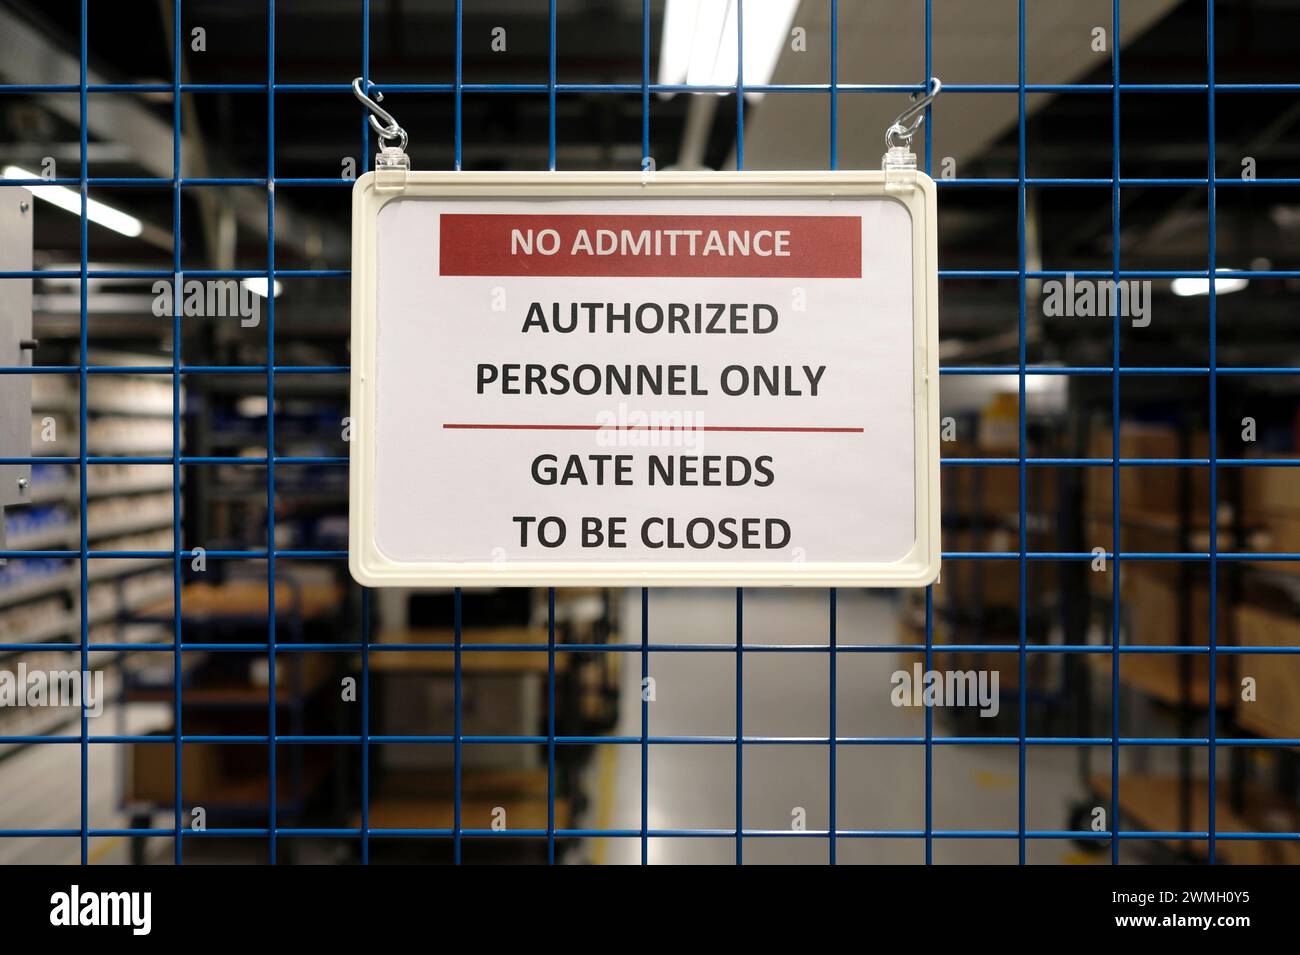 No admittance sign at a closed gate in a warehouse Stock Photo